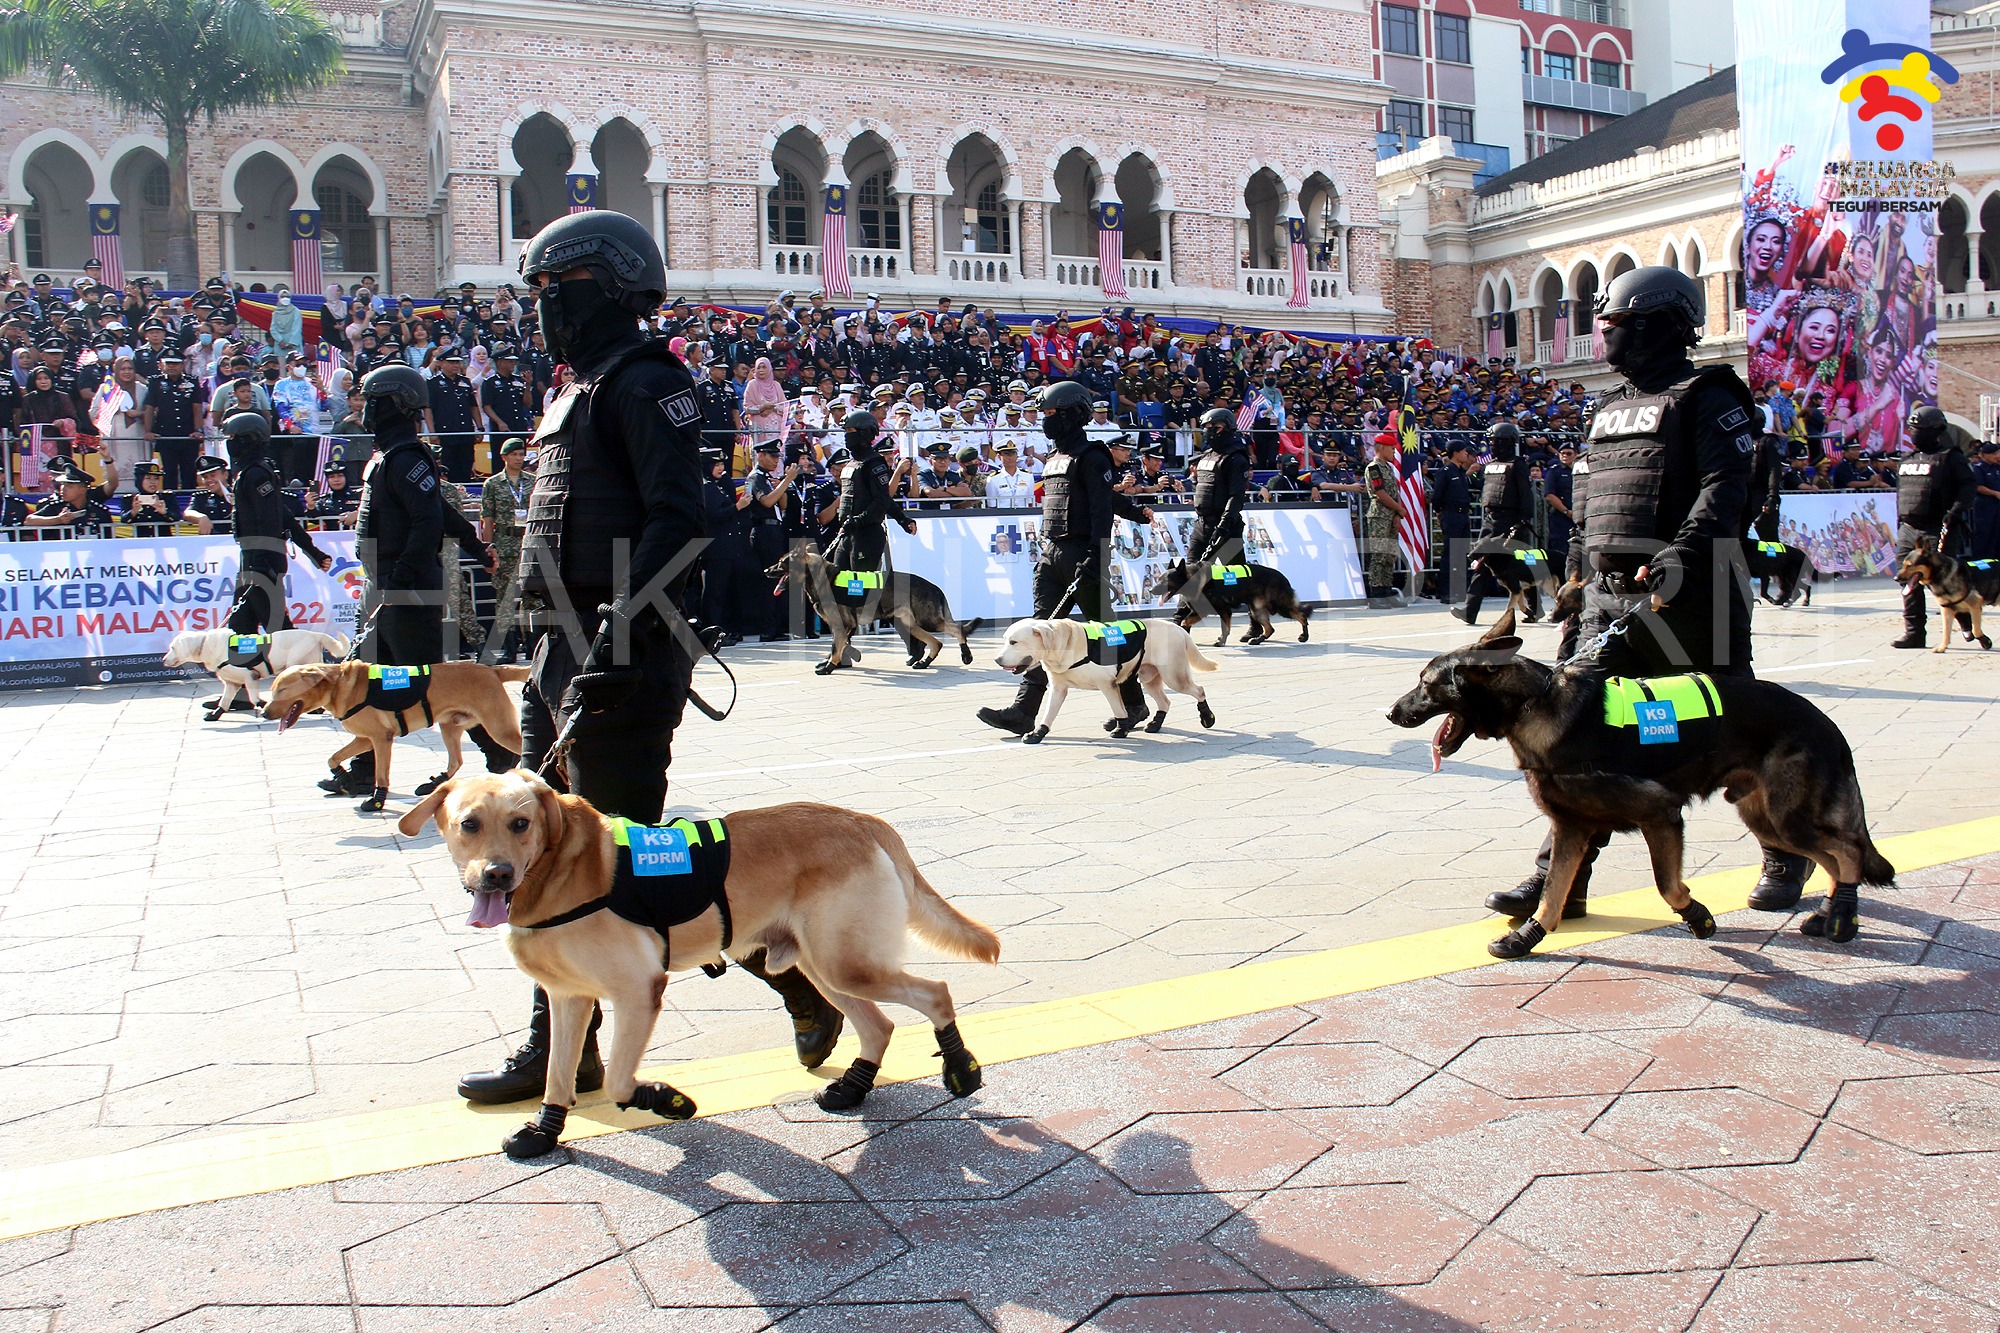 The Royal Malaysian Police's K9 unit dogs were seen wearing adorable tiny paw-boots during the Merdeka parade. Image credit: PDRM